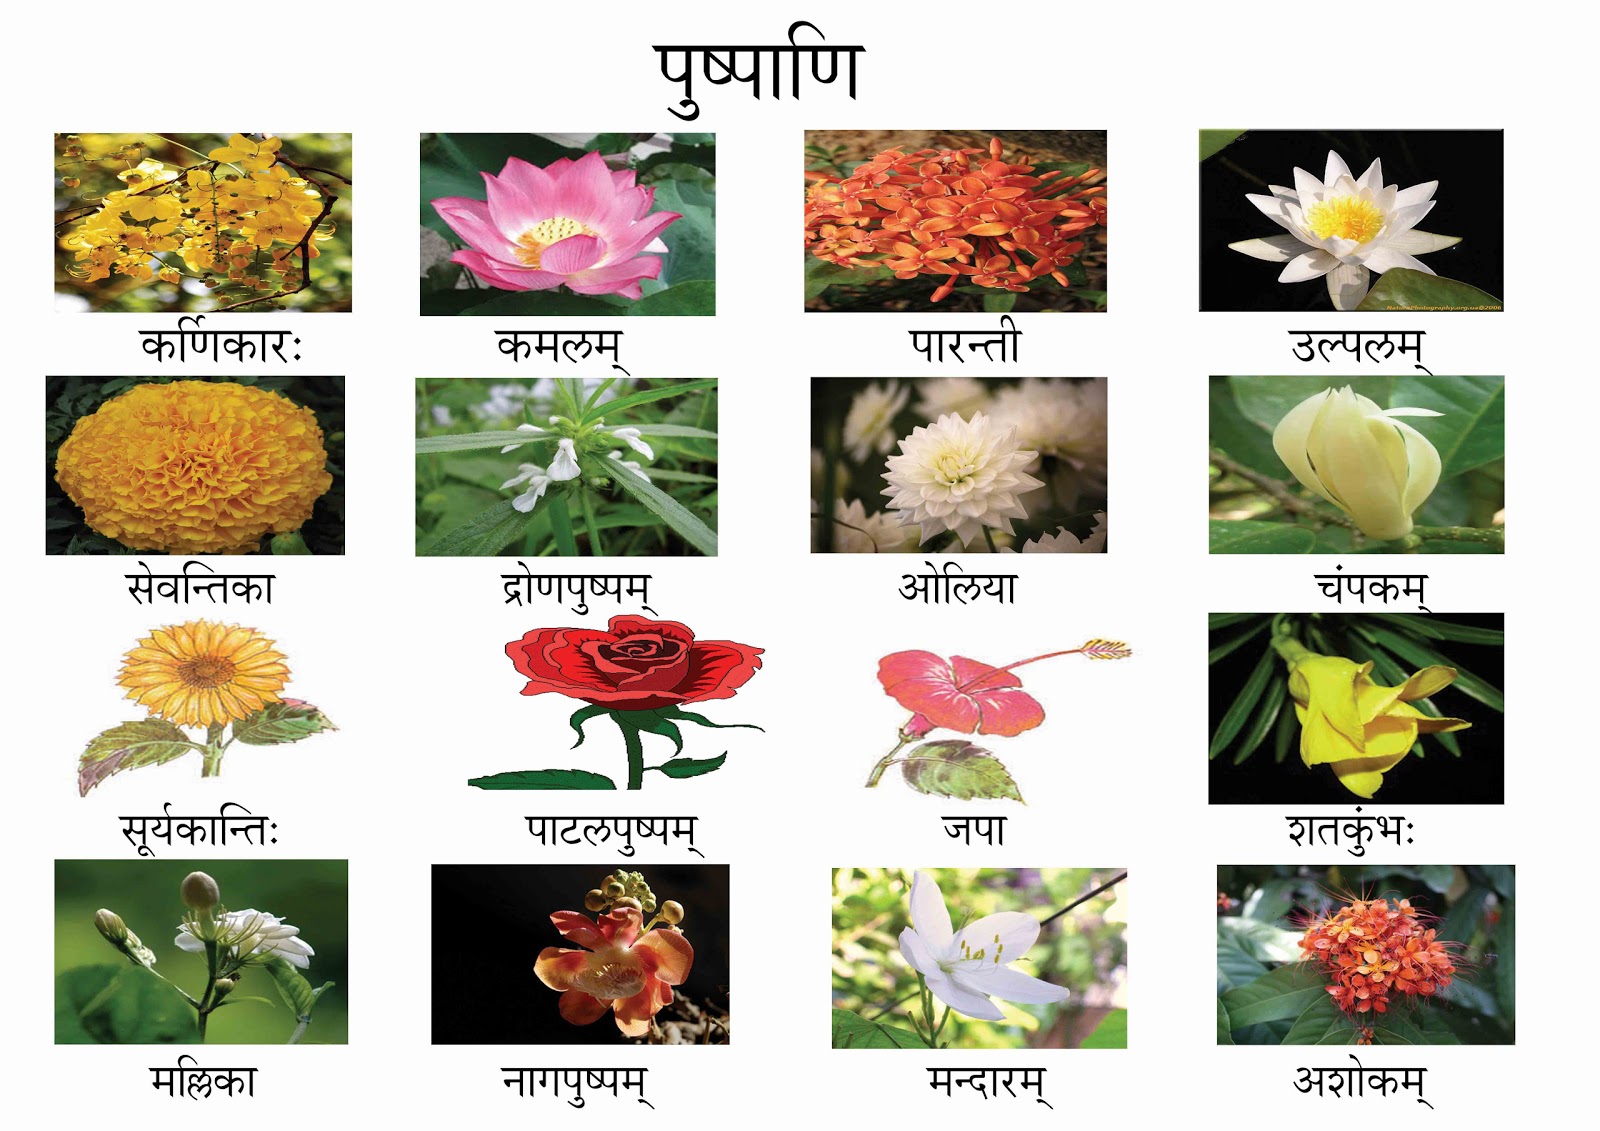 Unique Flowers Name And Images In Hindi Top Collection Of Different Types Of Flowers In The Images Hd